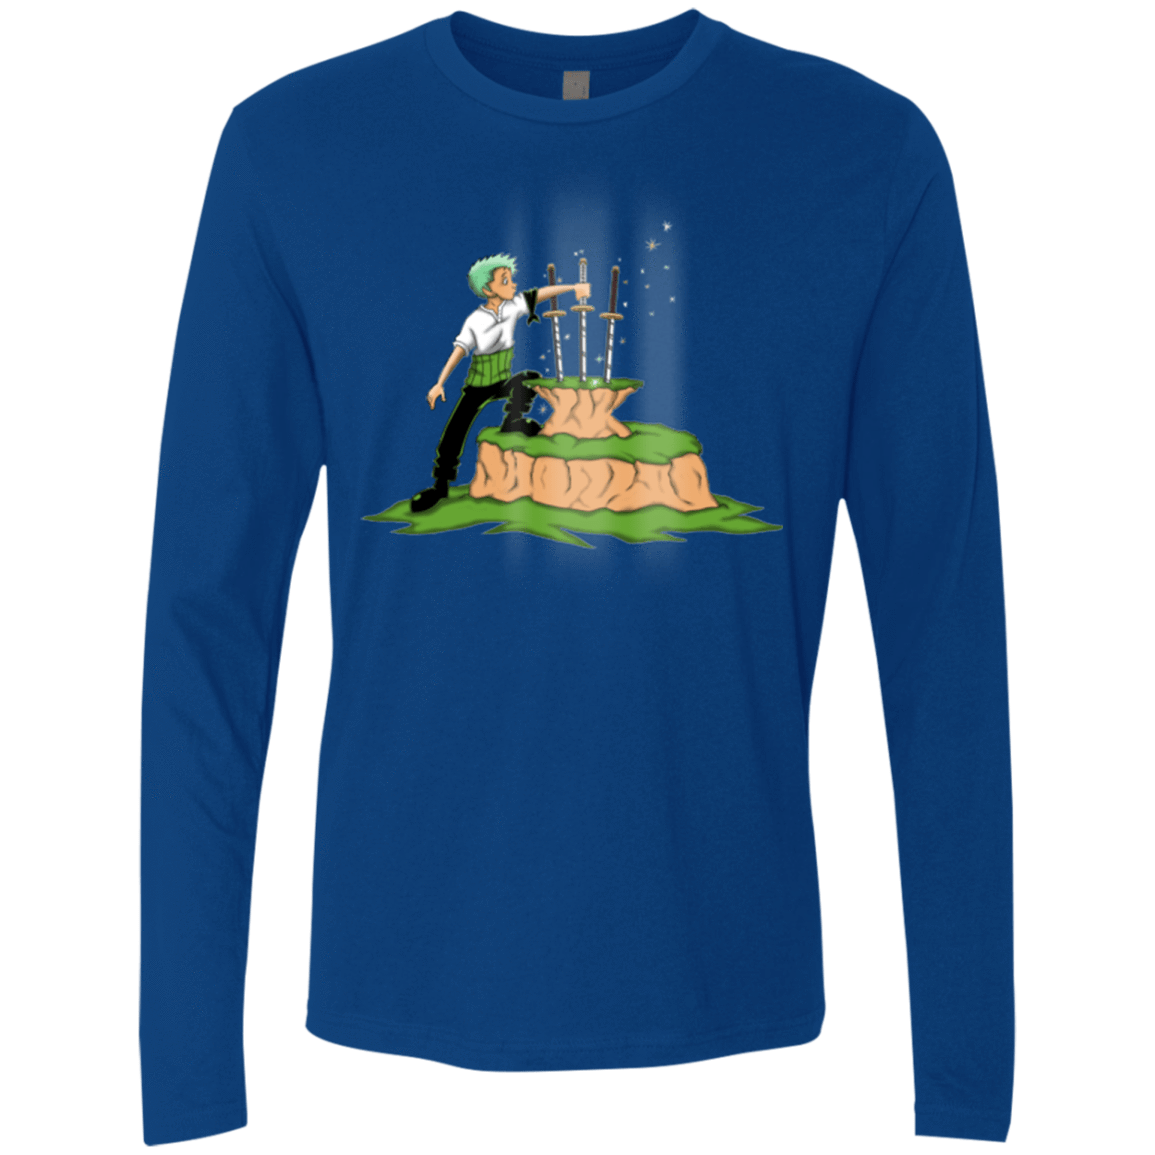 T-Shirts Royal / Small 3 Swords in the Stone Men's Premium Long Sleeve